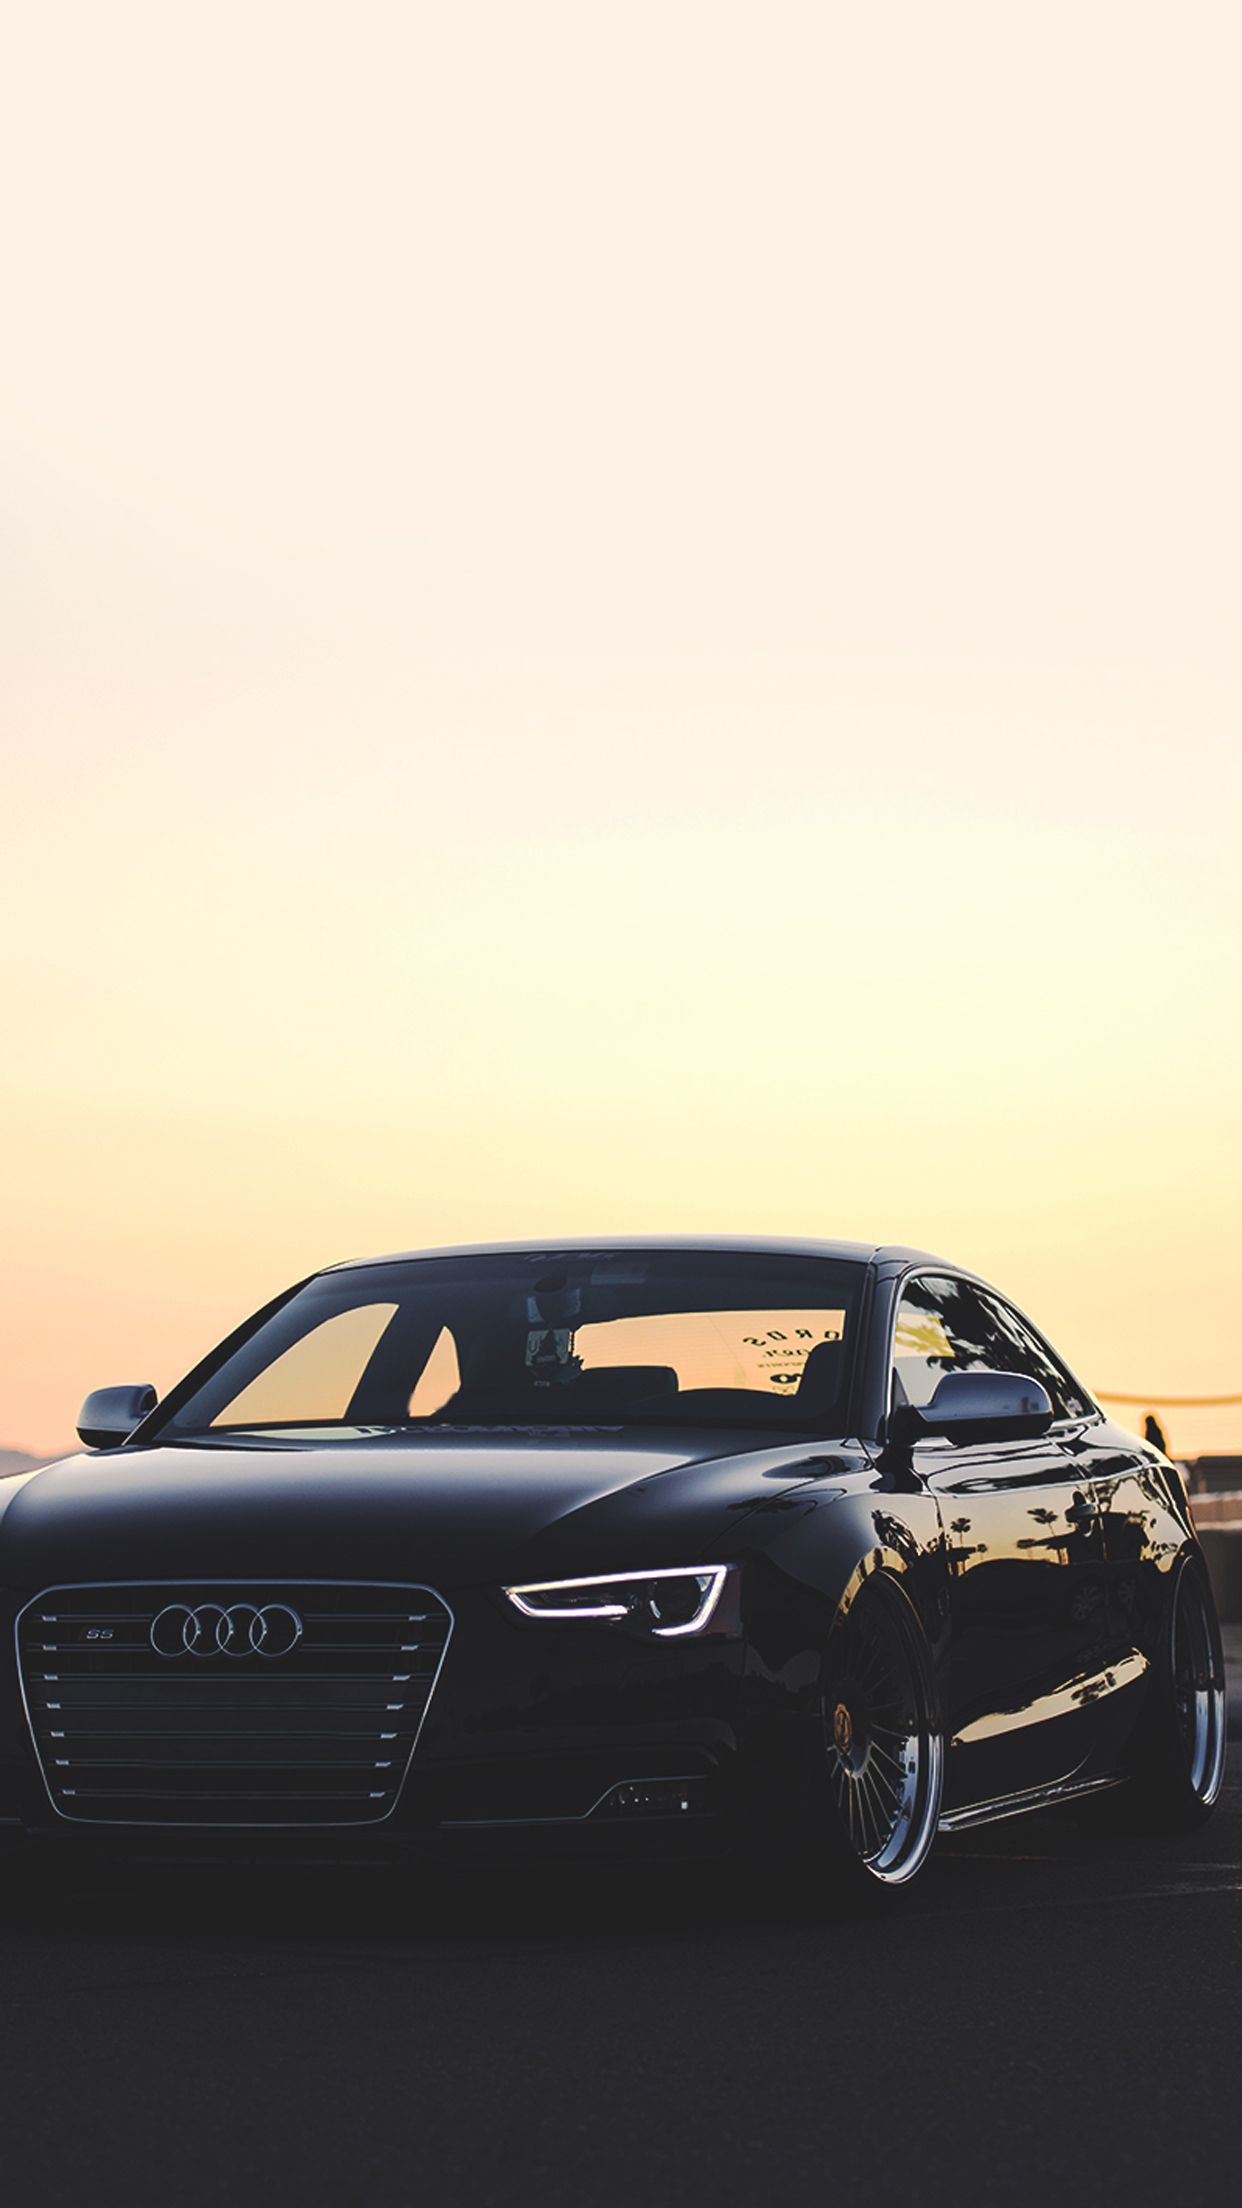 iPhone Luxury Cars Wallpaper Audi R8 Black Front The List